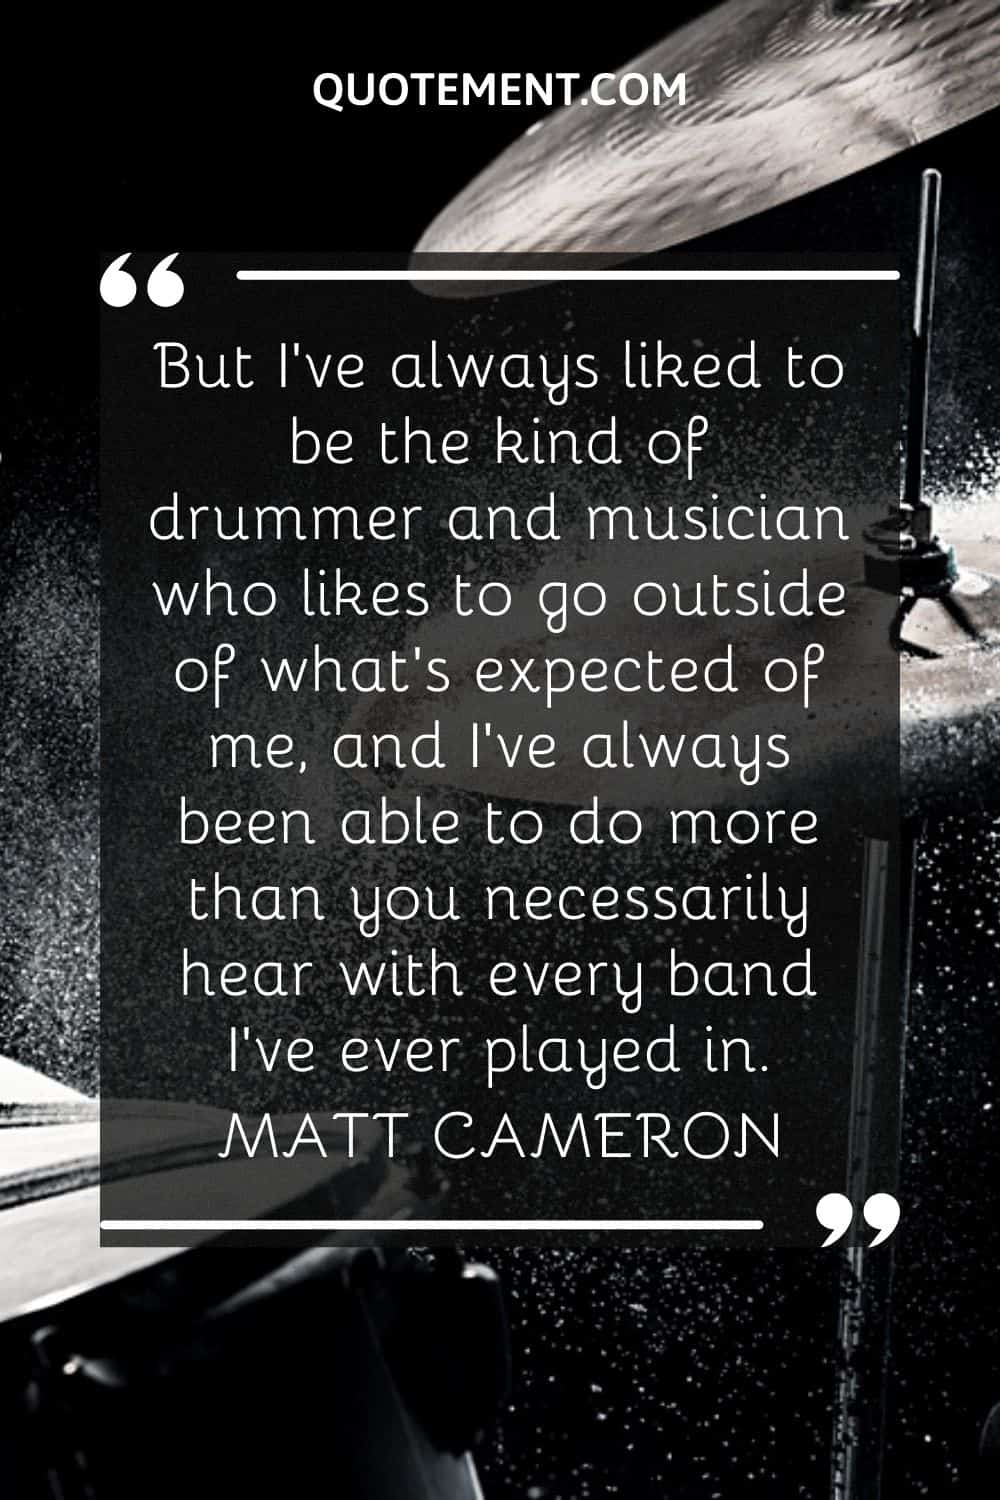 But I've always liked to be the kind of drummer and musician who likes to go outside of what's expected of me